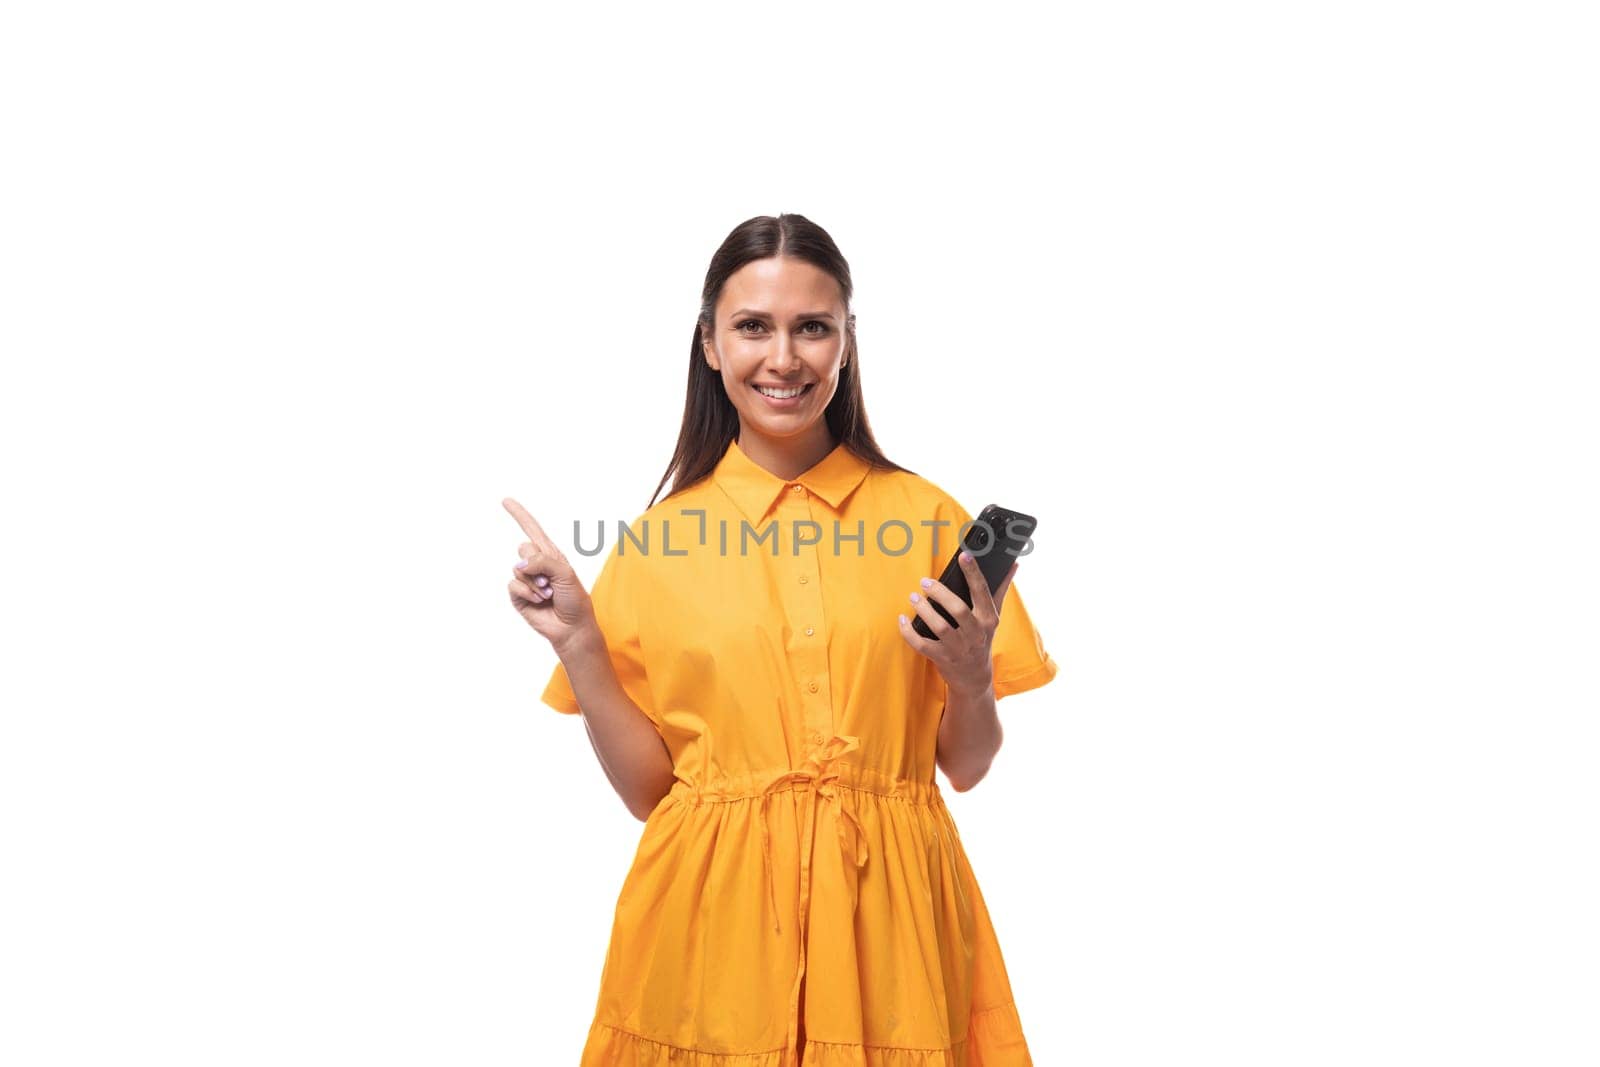 pretty young brunette lady dressed in a bright yellow dress on vacation smiling joyfully holding a phone in her hand by TRMK